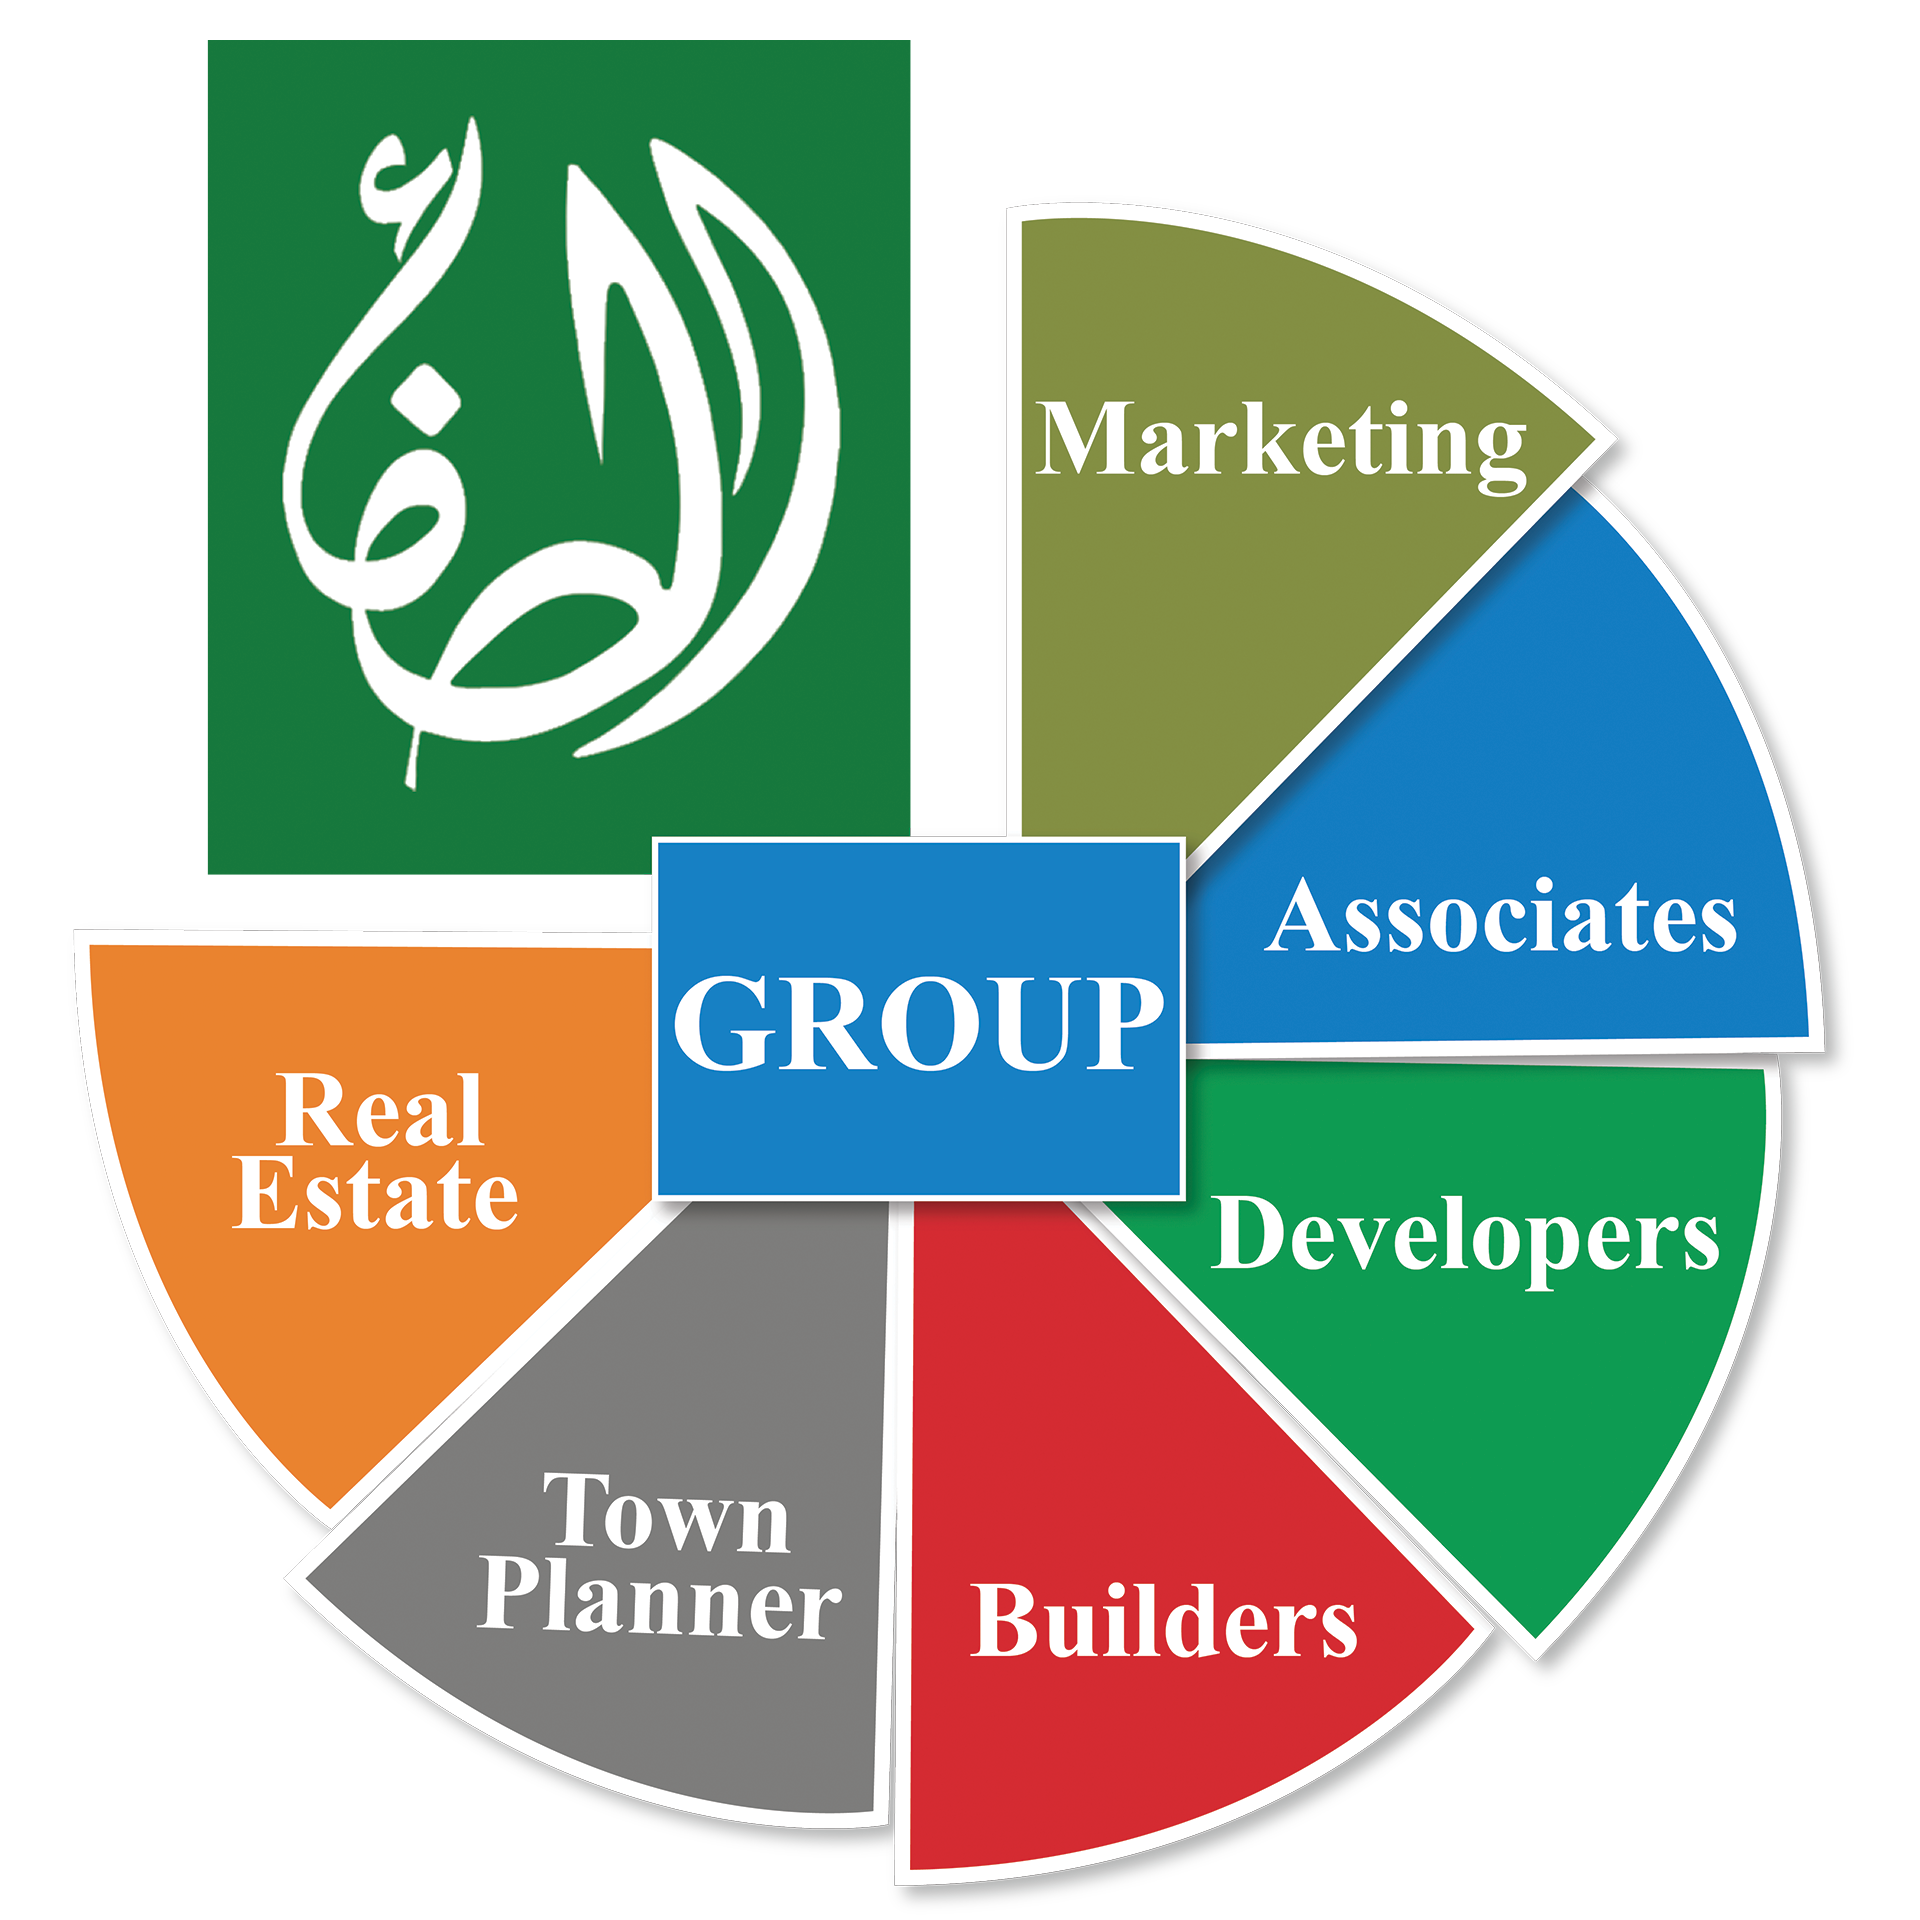 About Us - Al Safa Group - Who We Are